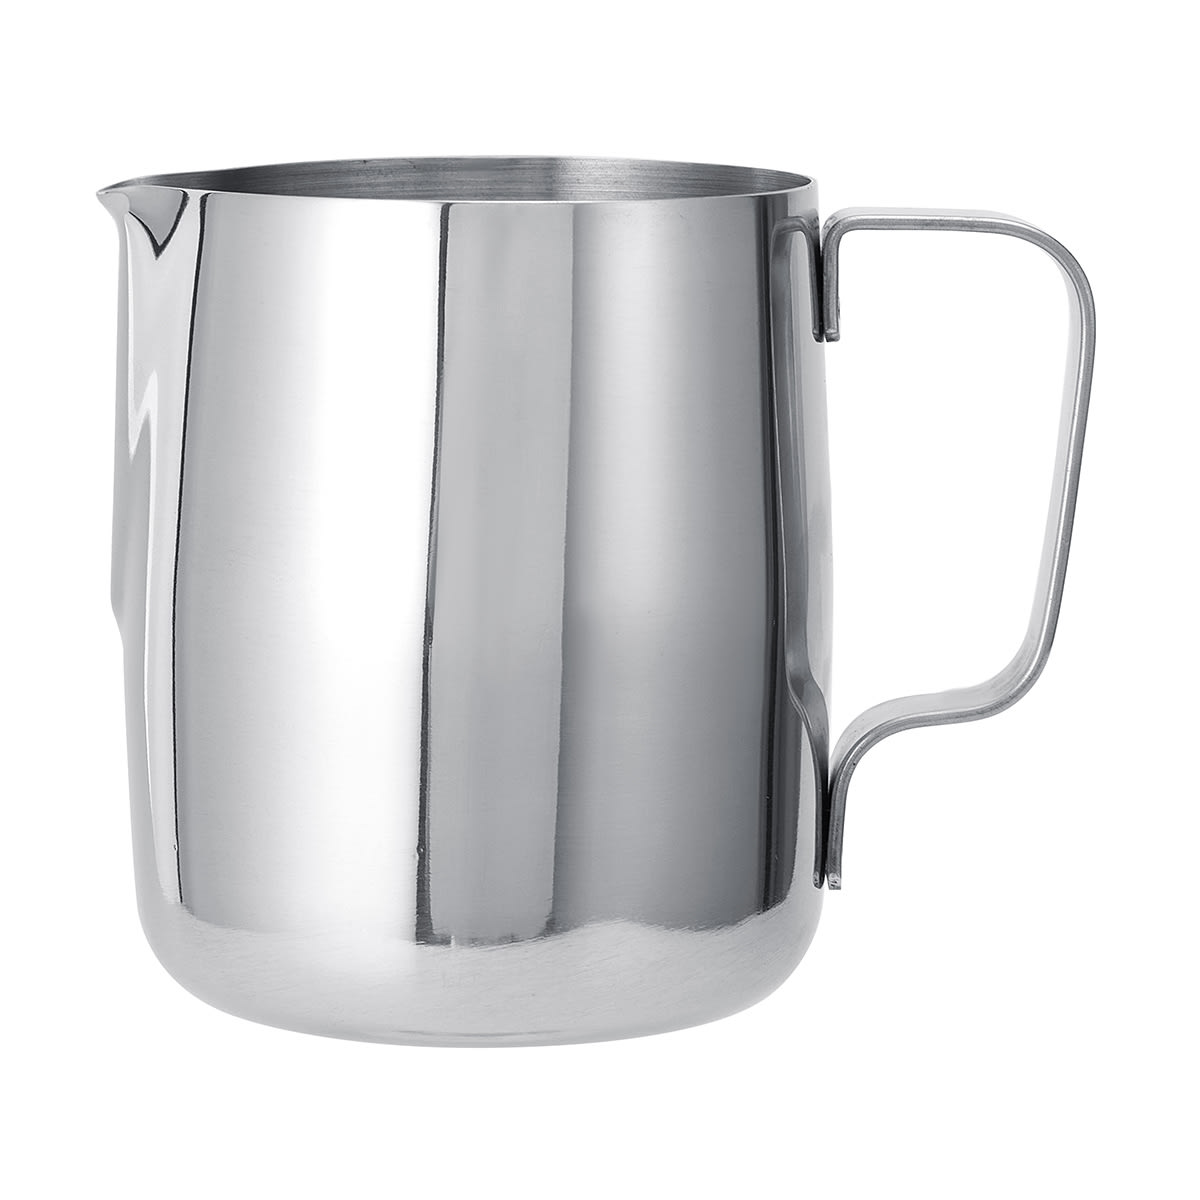 Cilio 0000293166 Frothing Jug 500 ml Stainless Steel   4 x 13 x 16,4  